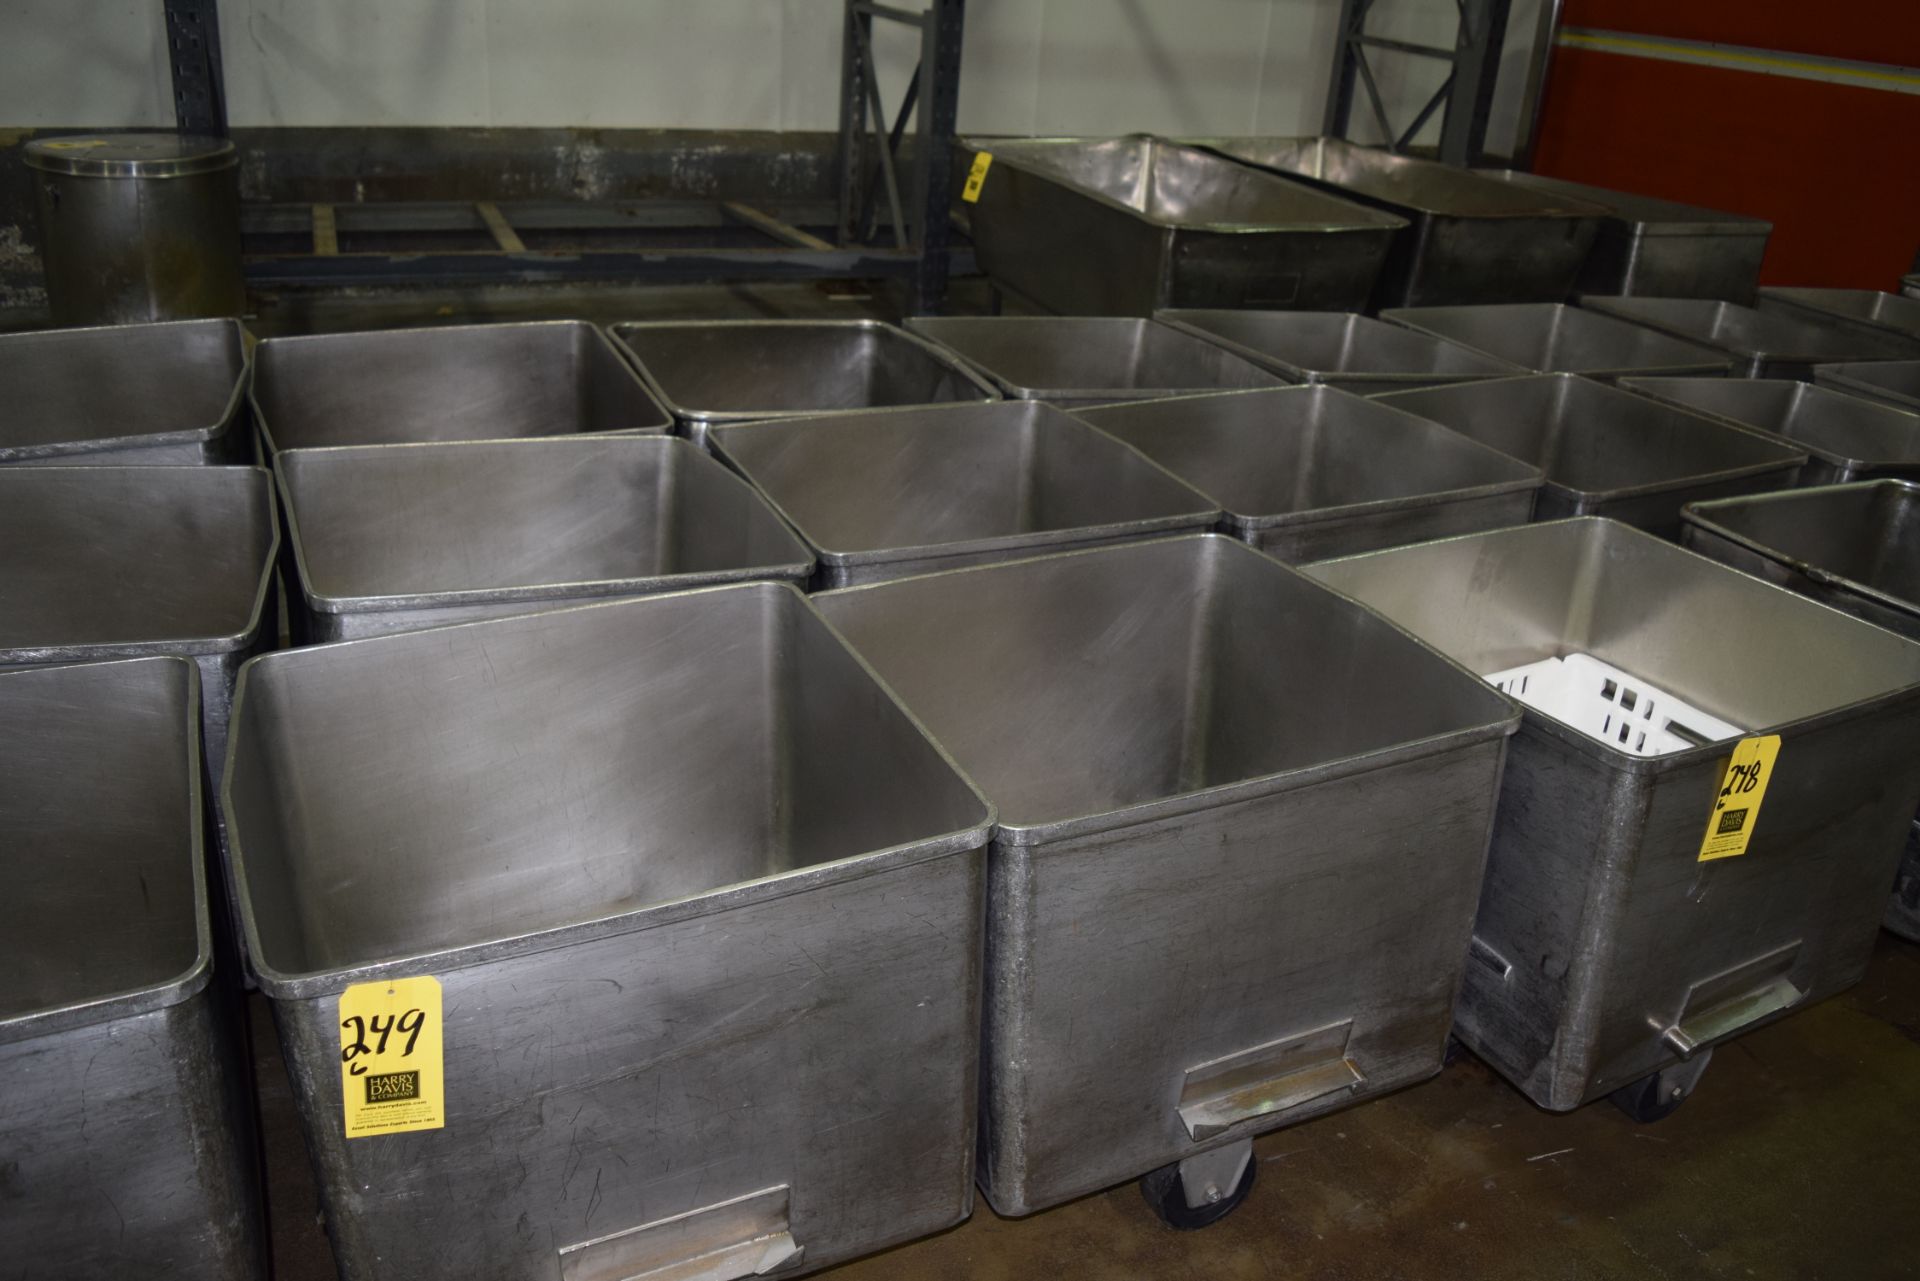 S/S Dumper Tubs, Mounted on Casters